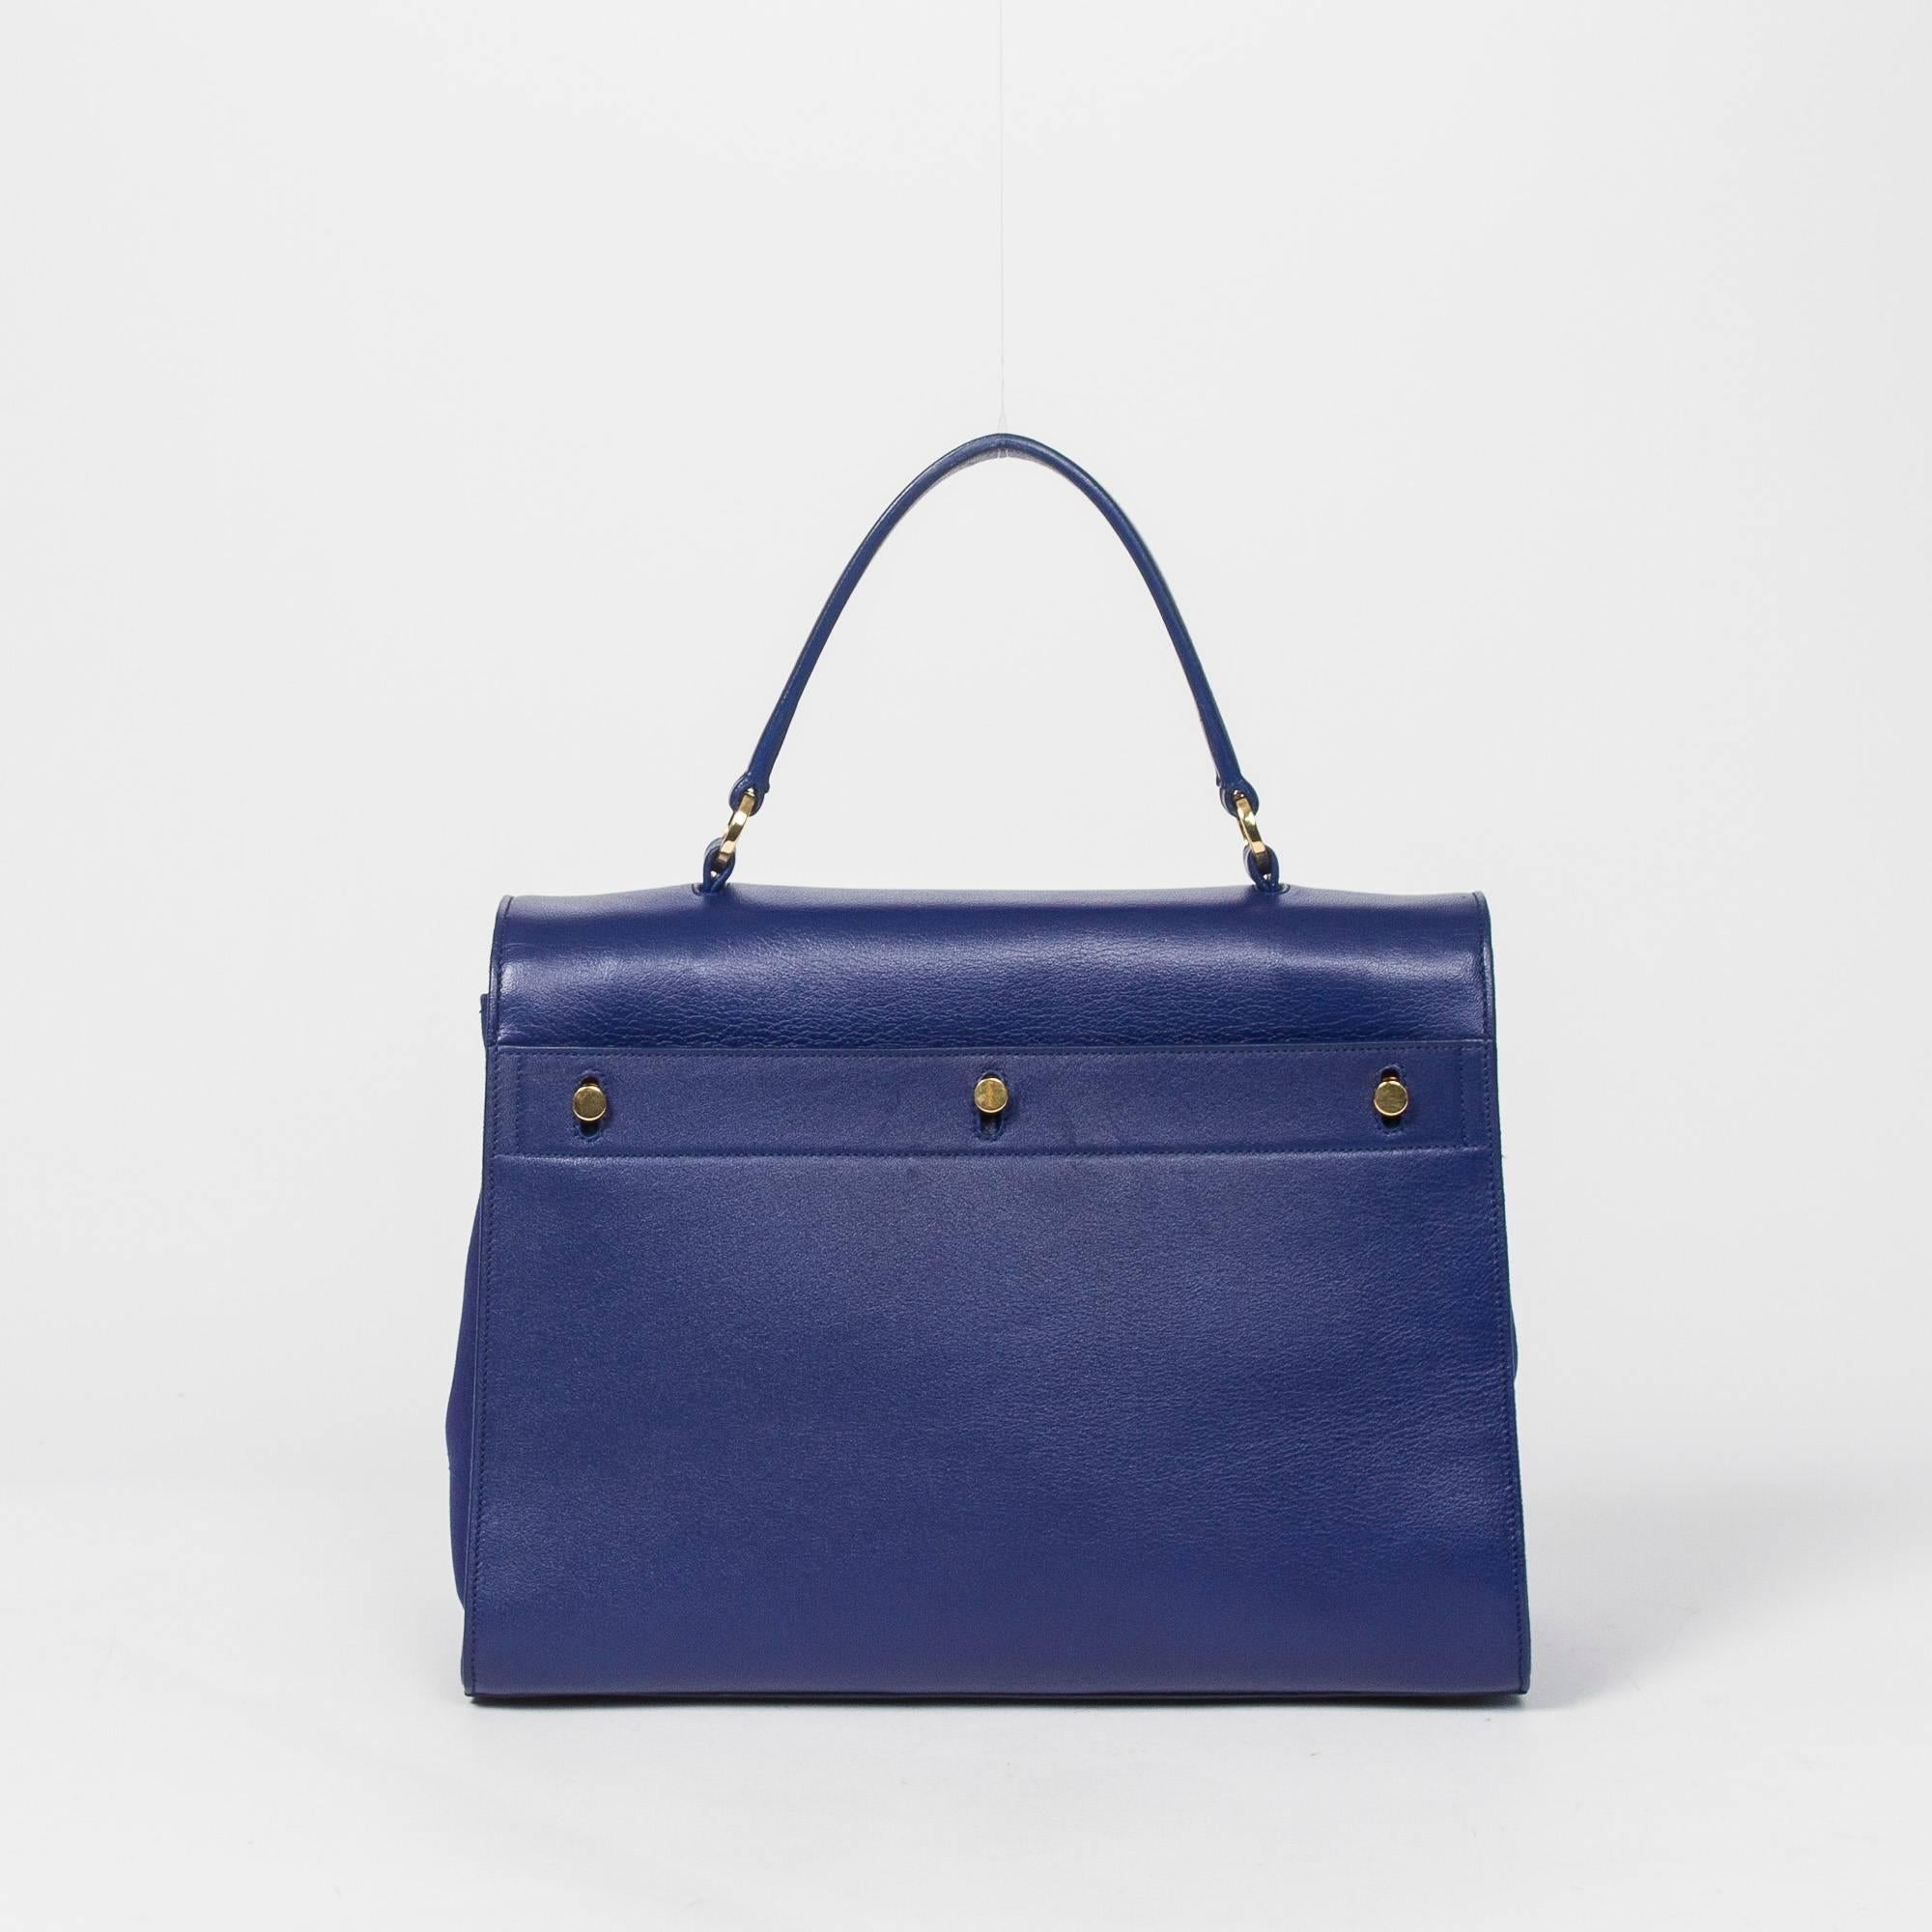 Yves Saint Laurent Muse 2 New Model in Blue calf leather 1